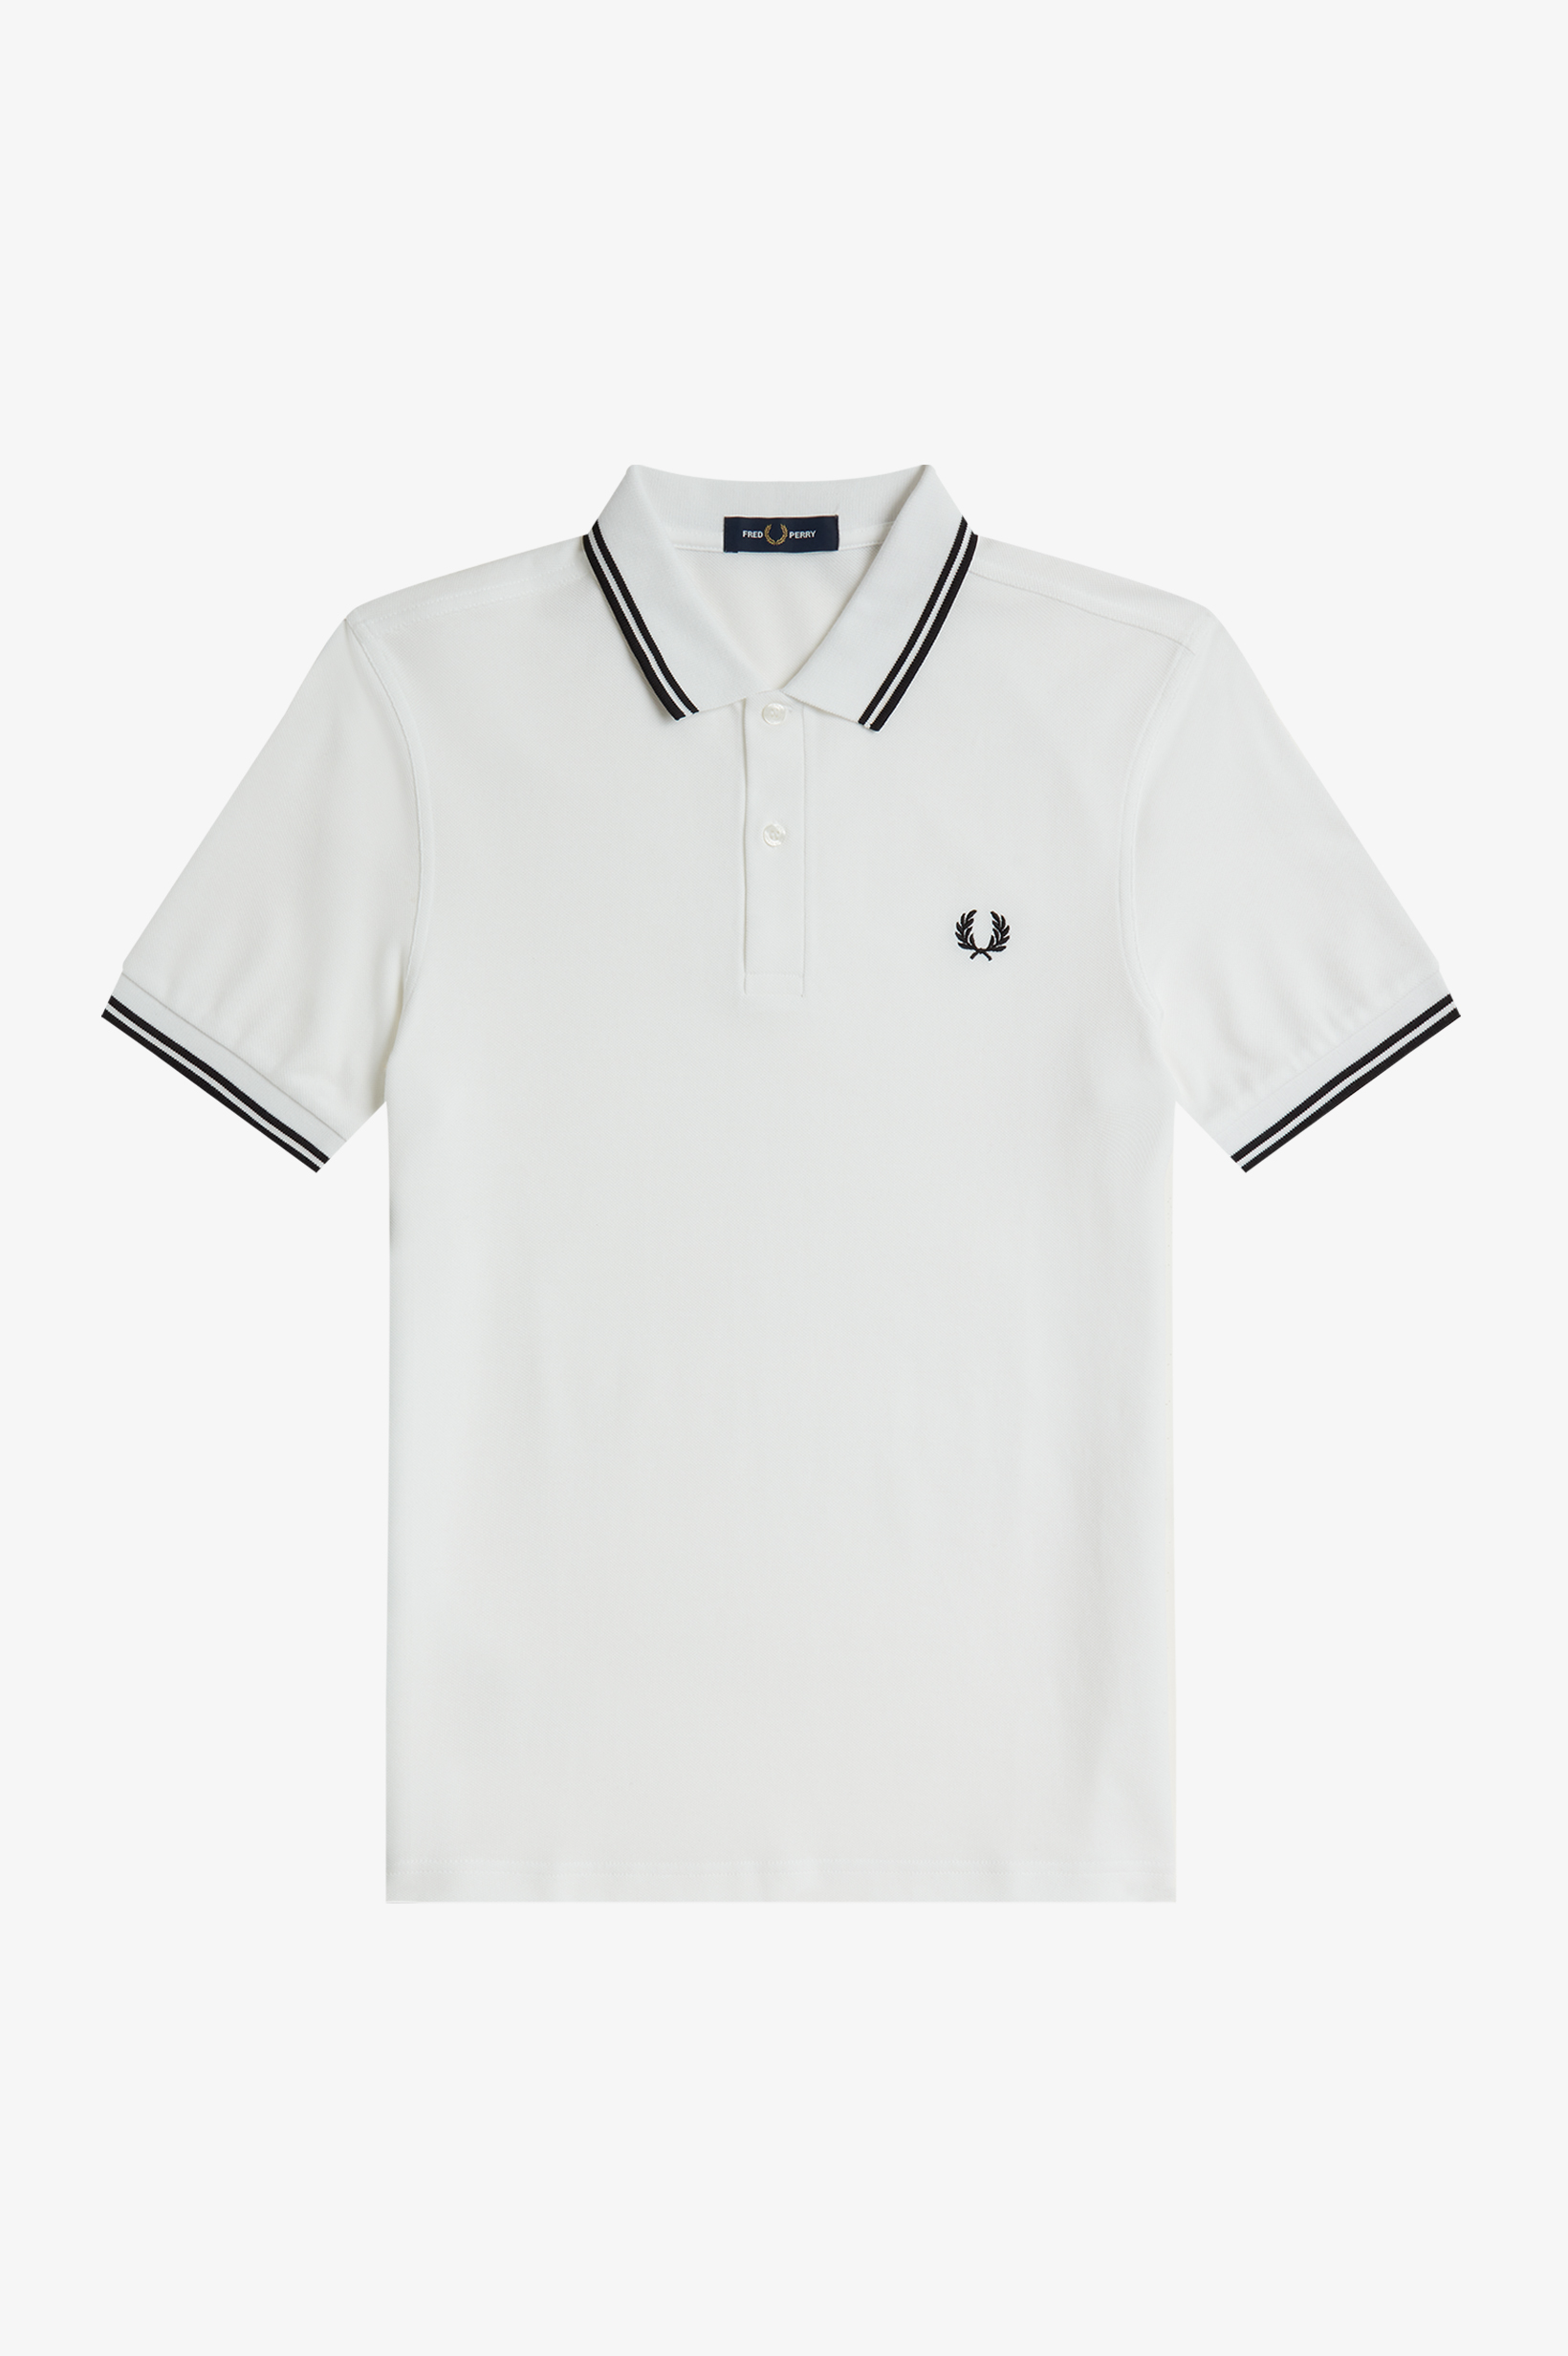 Fred Perry - TWIN TIPPED POLO SHIRT - White/Black/Black